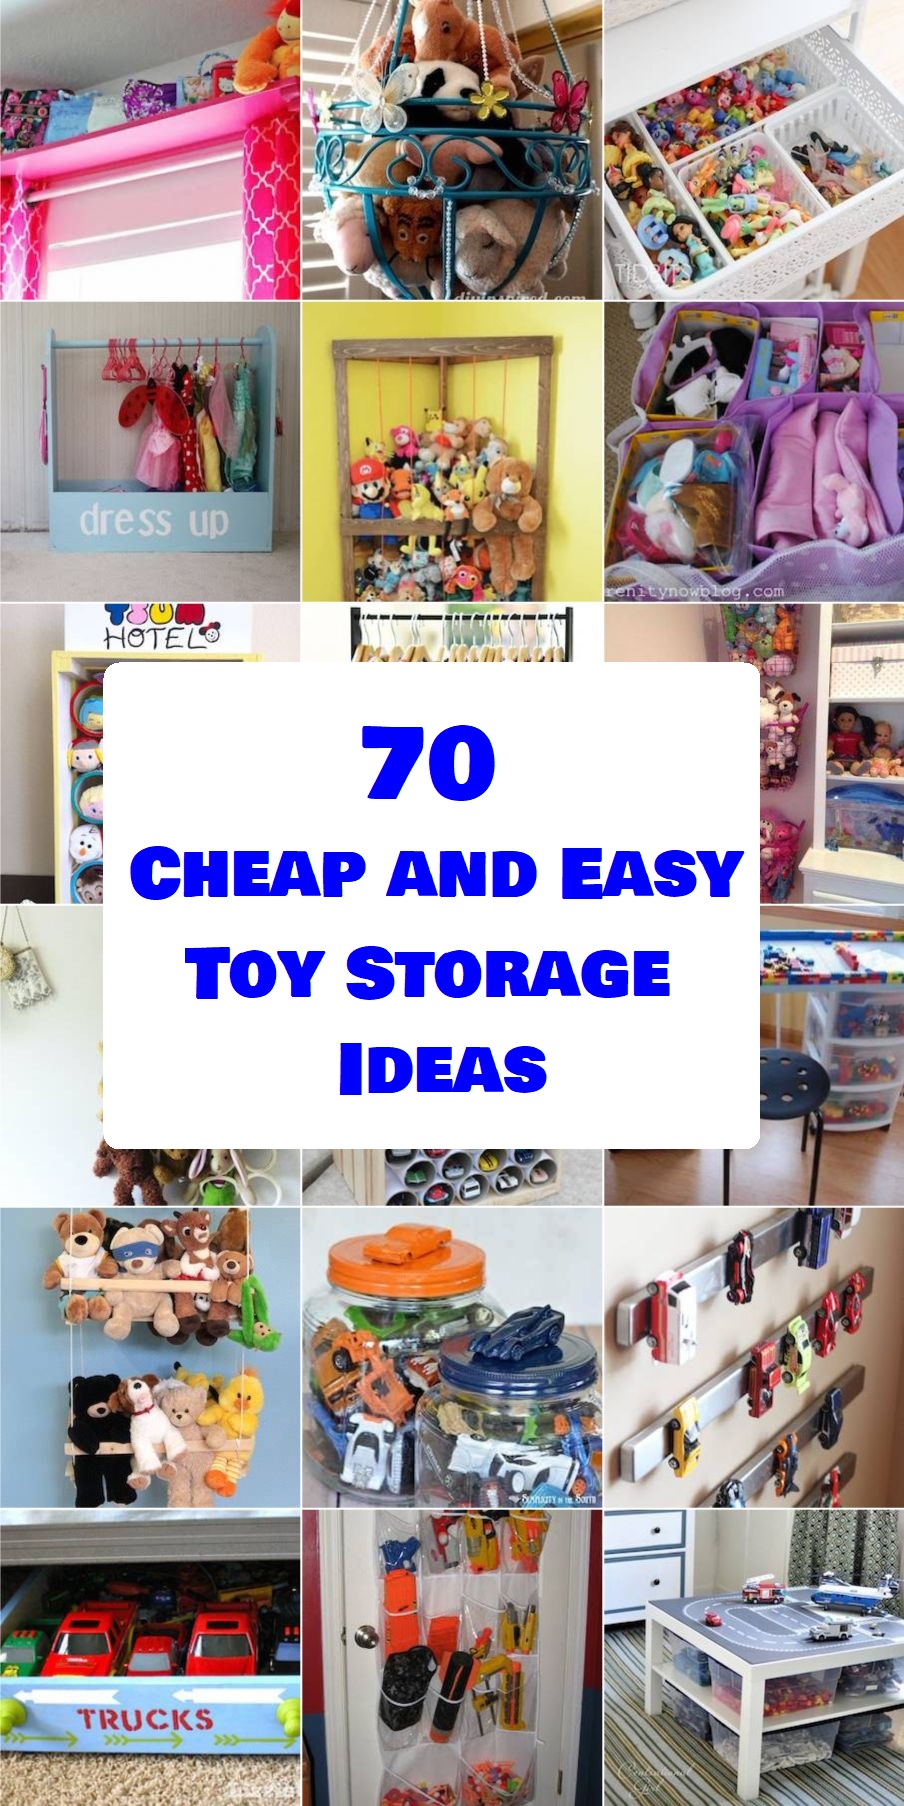 70 Cheap and Easy Toy Storage Ideas